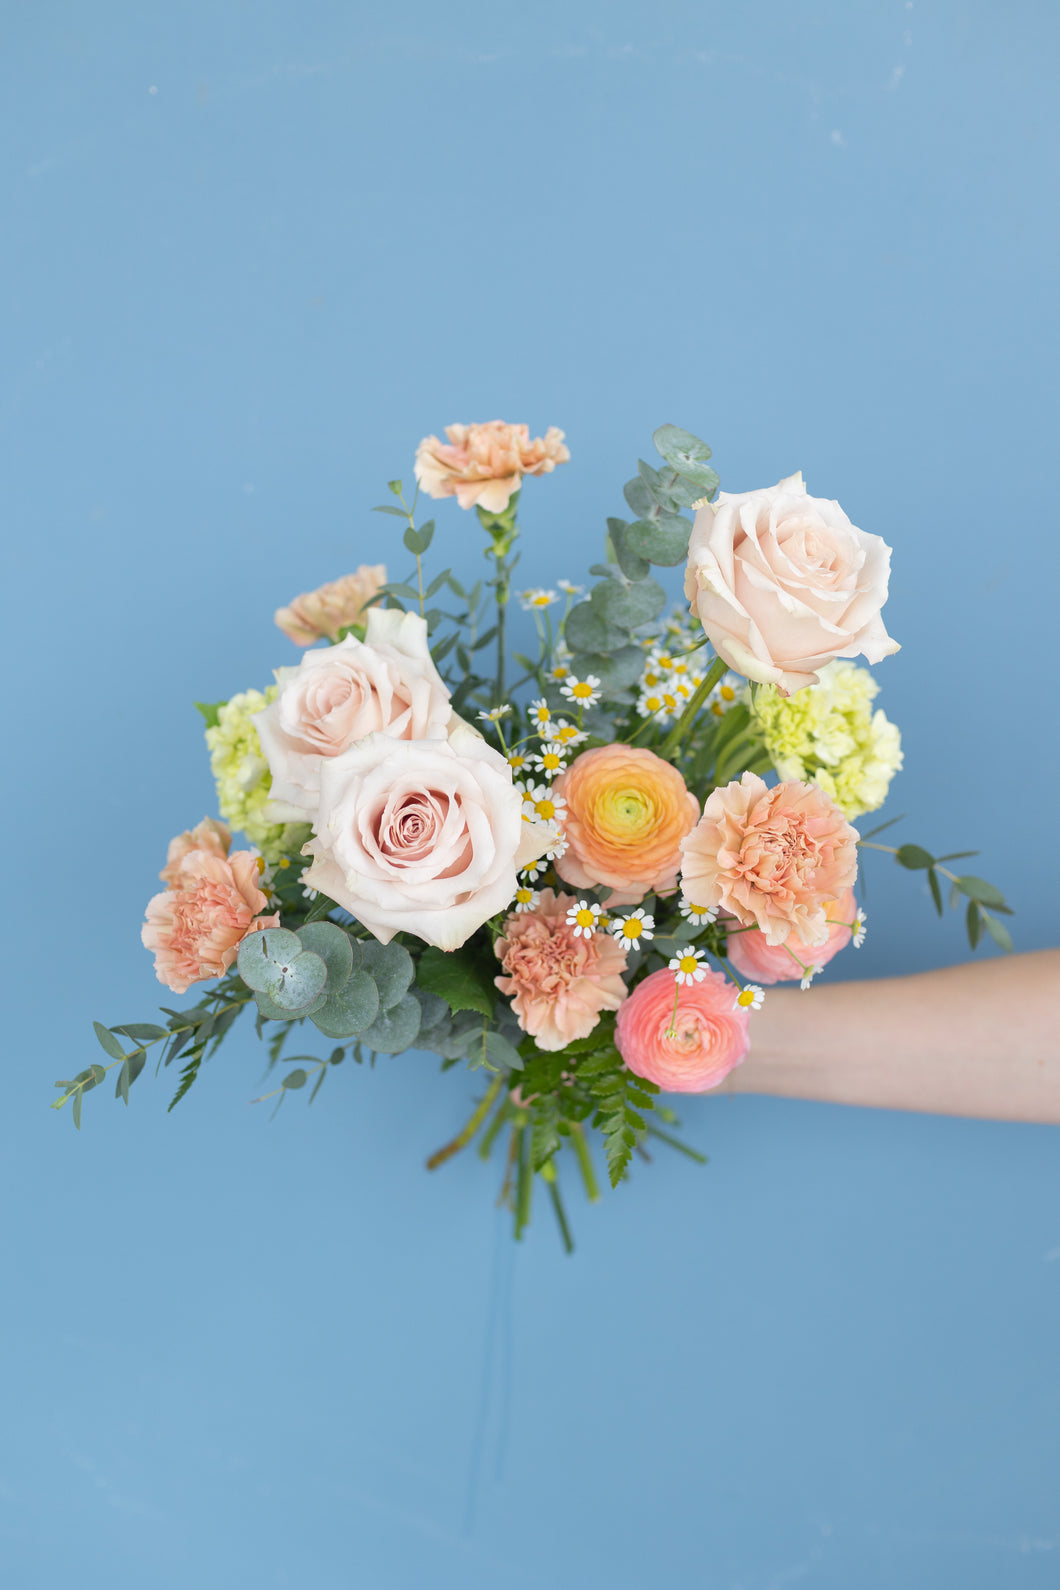 Large Hand-tied Bouquet